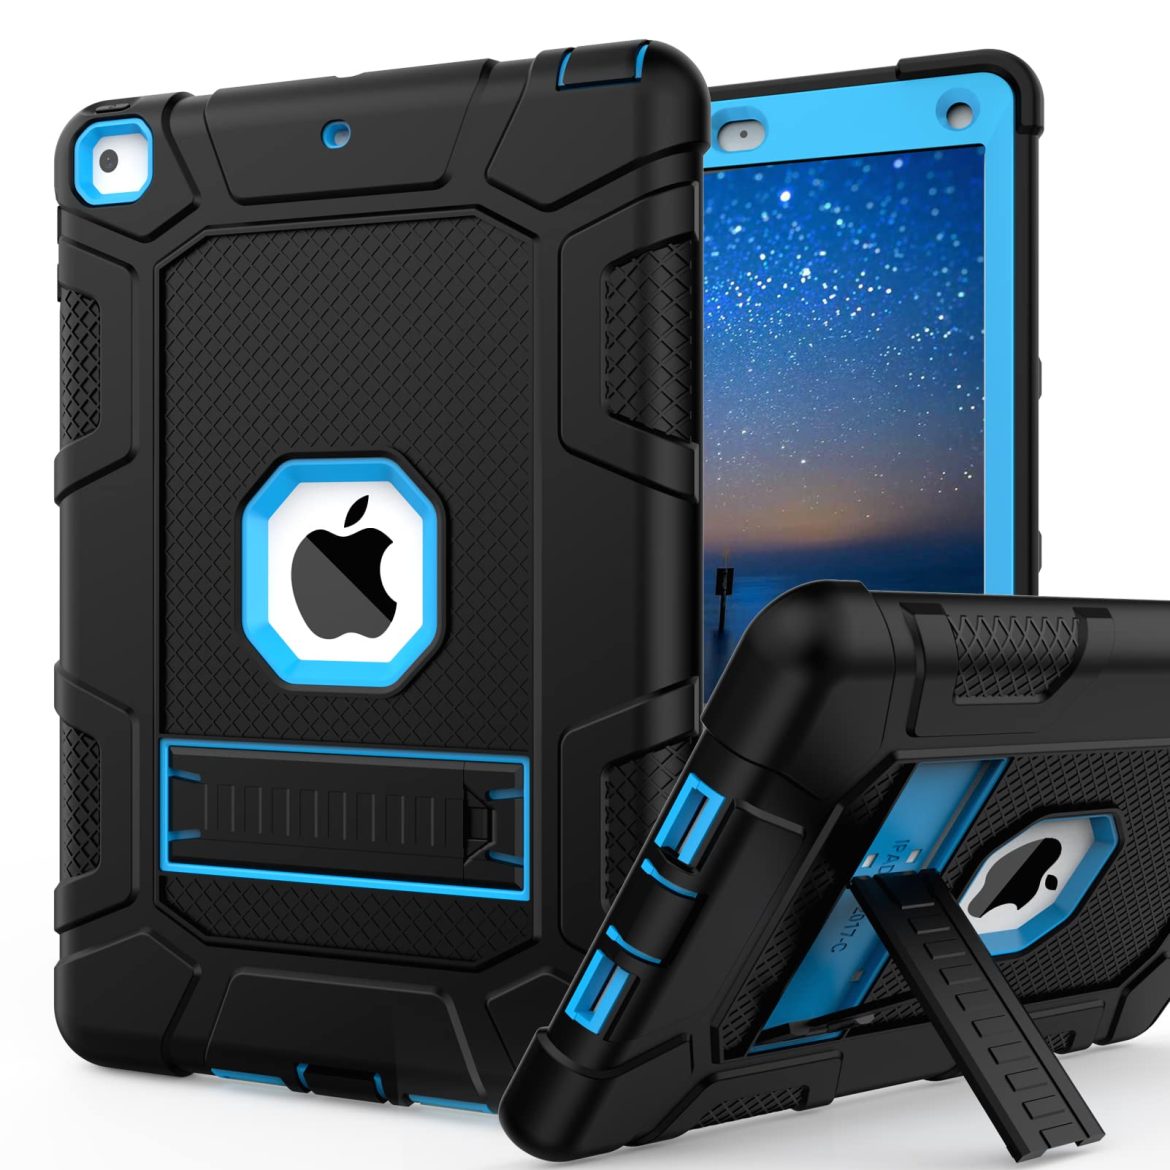 iPad Cases – Protect Your Apple Products With a Folio Case